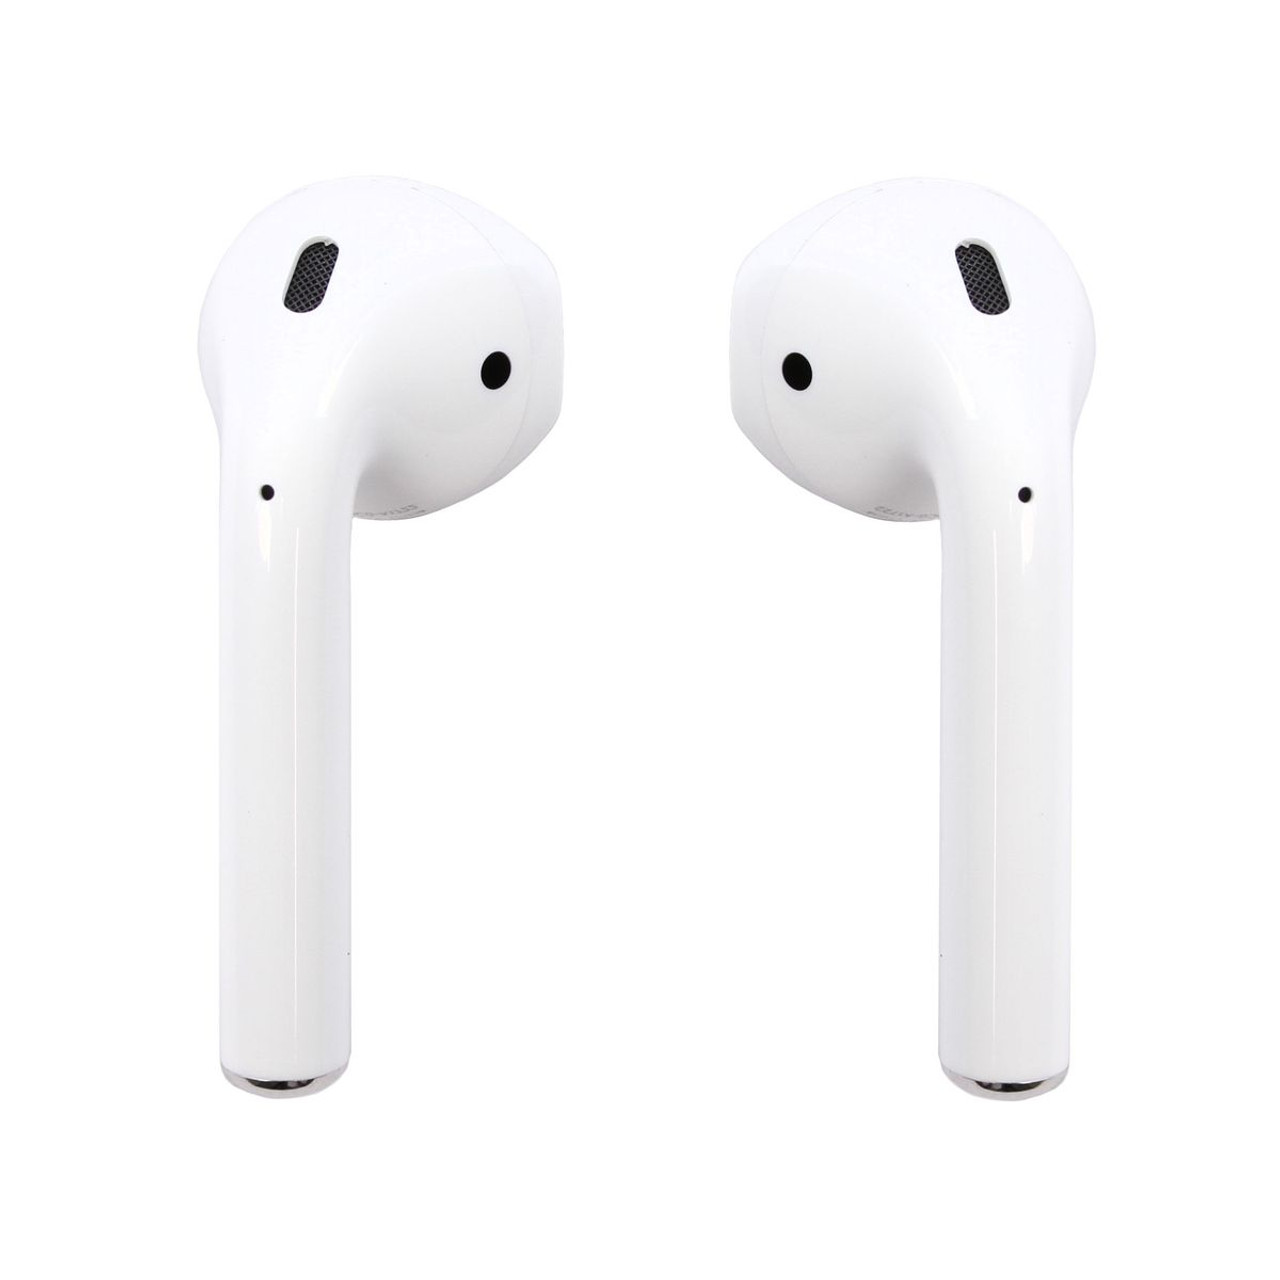 Apple AirPods 2 with Charging Case and MFI Cable product image